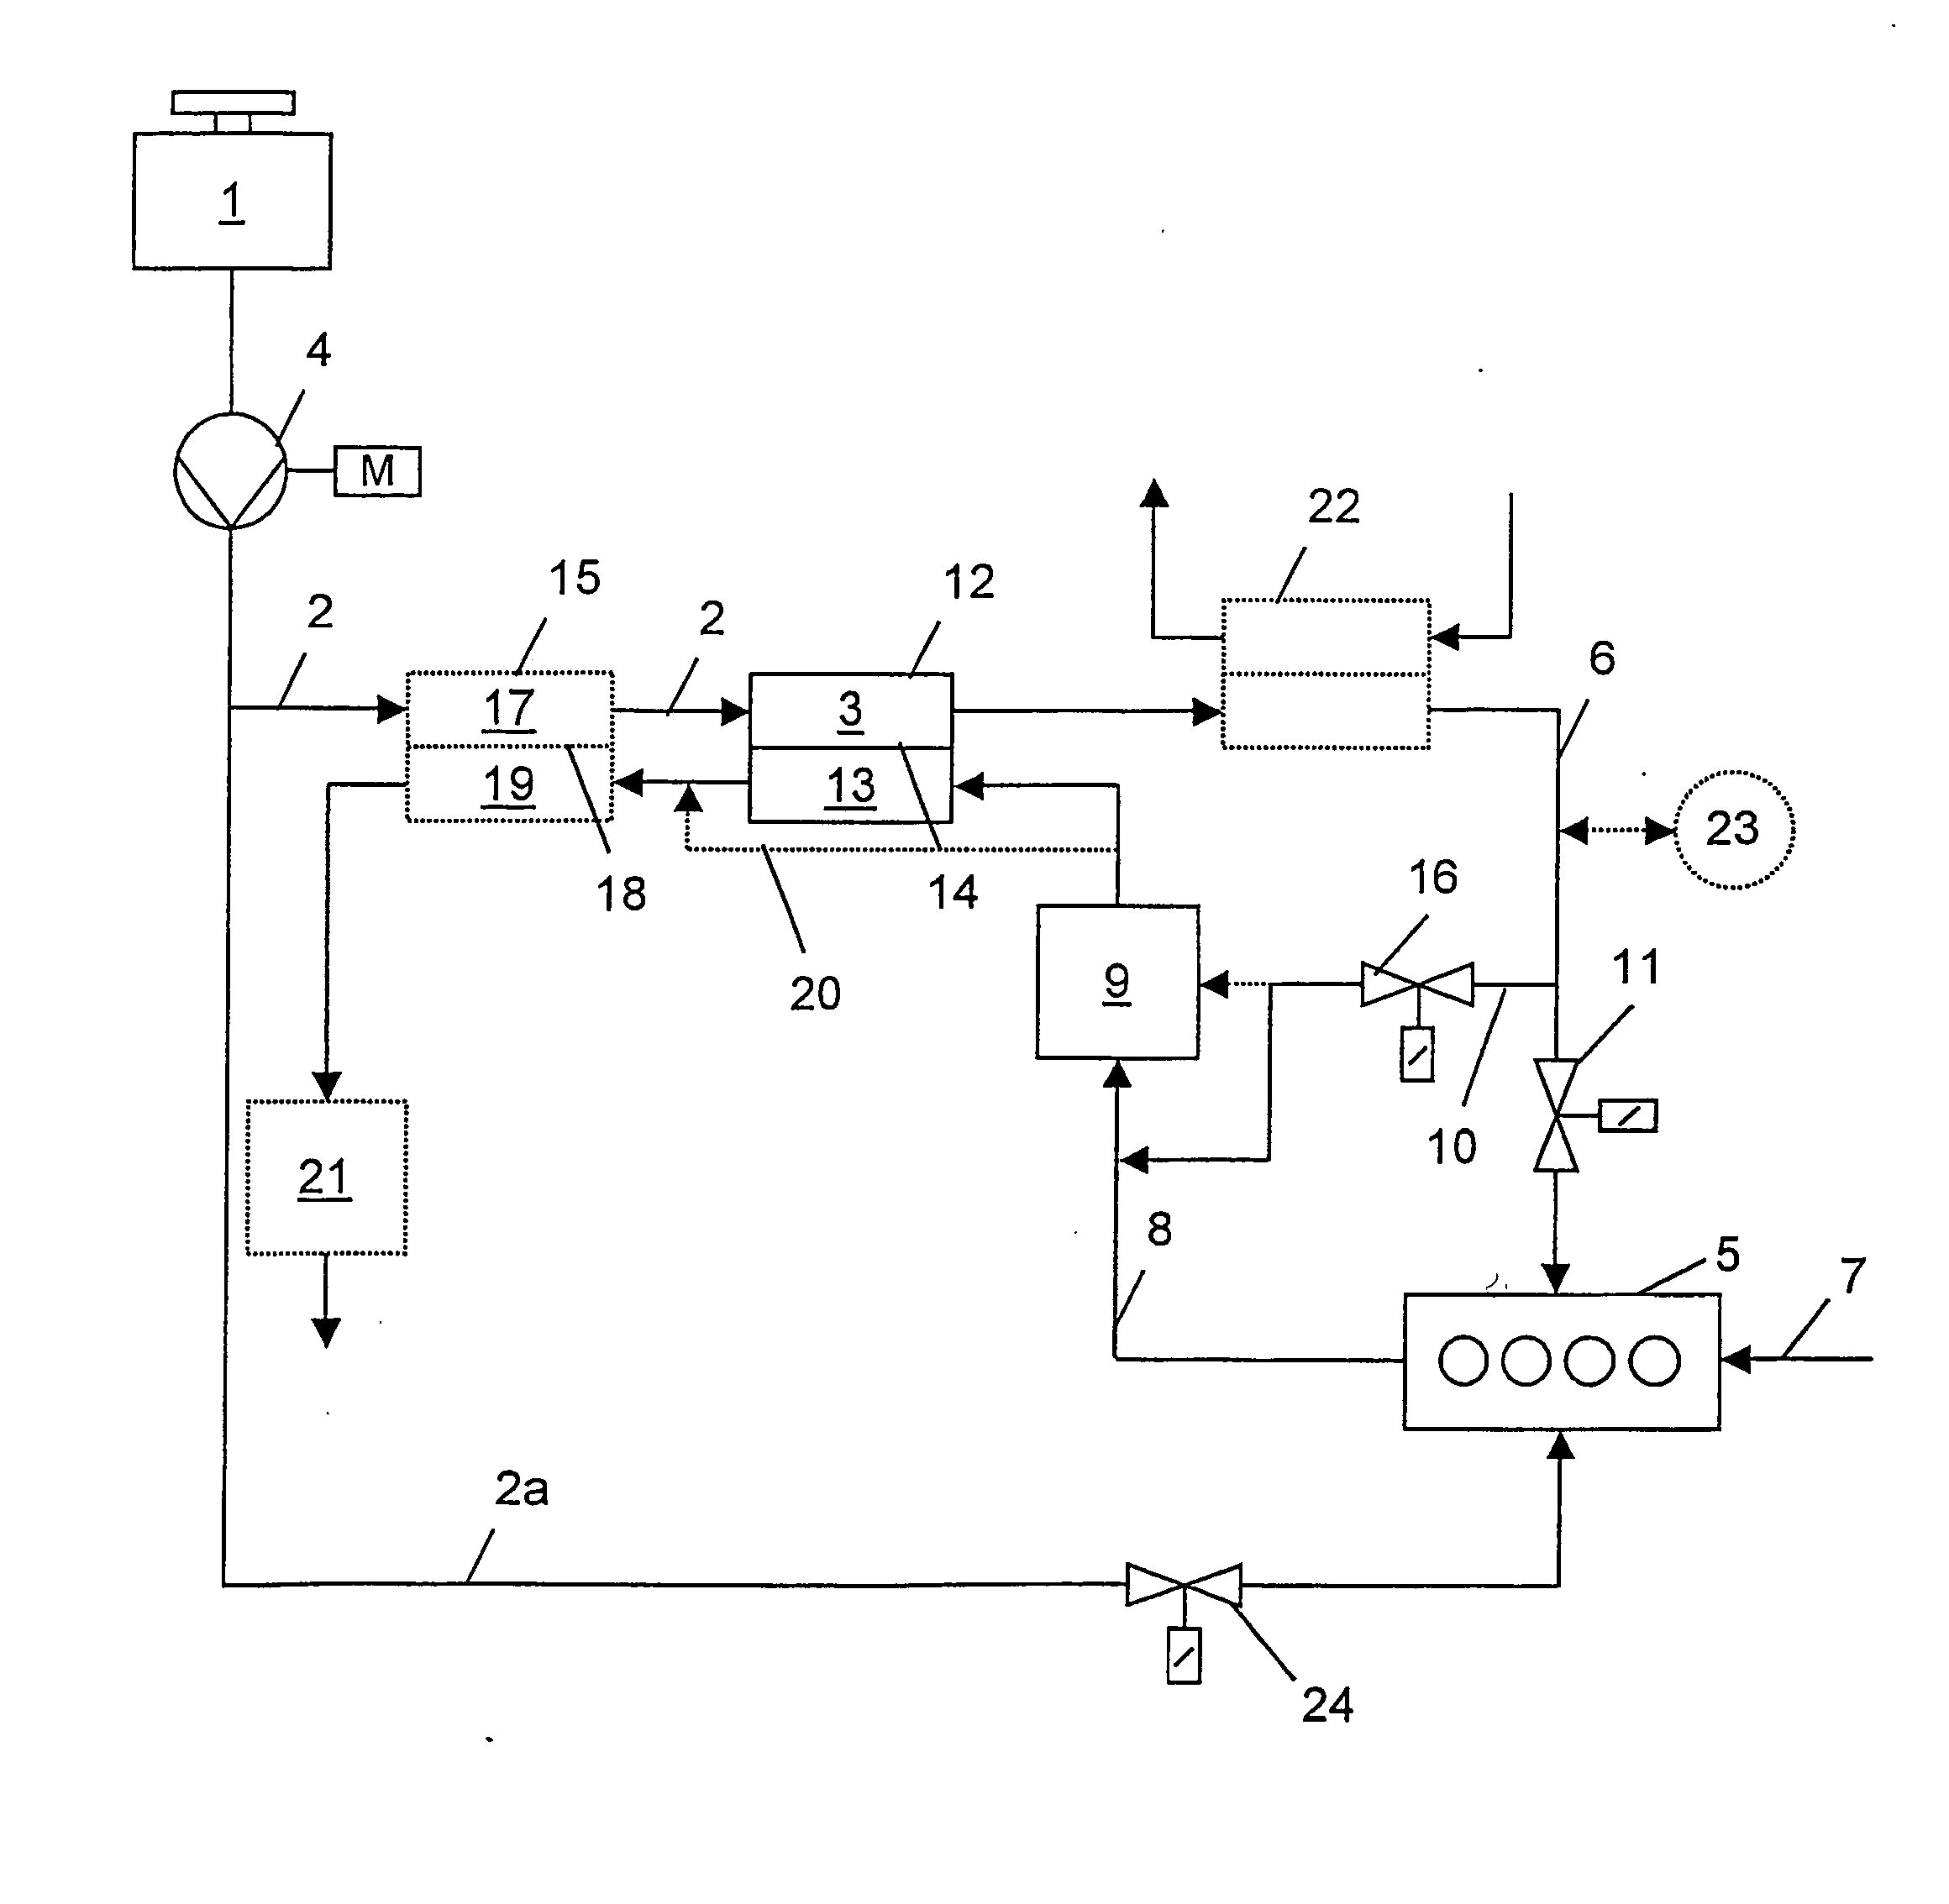 Internal combustion engine fuel supply system